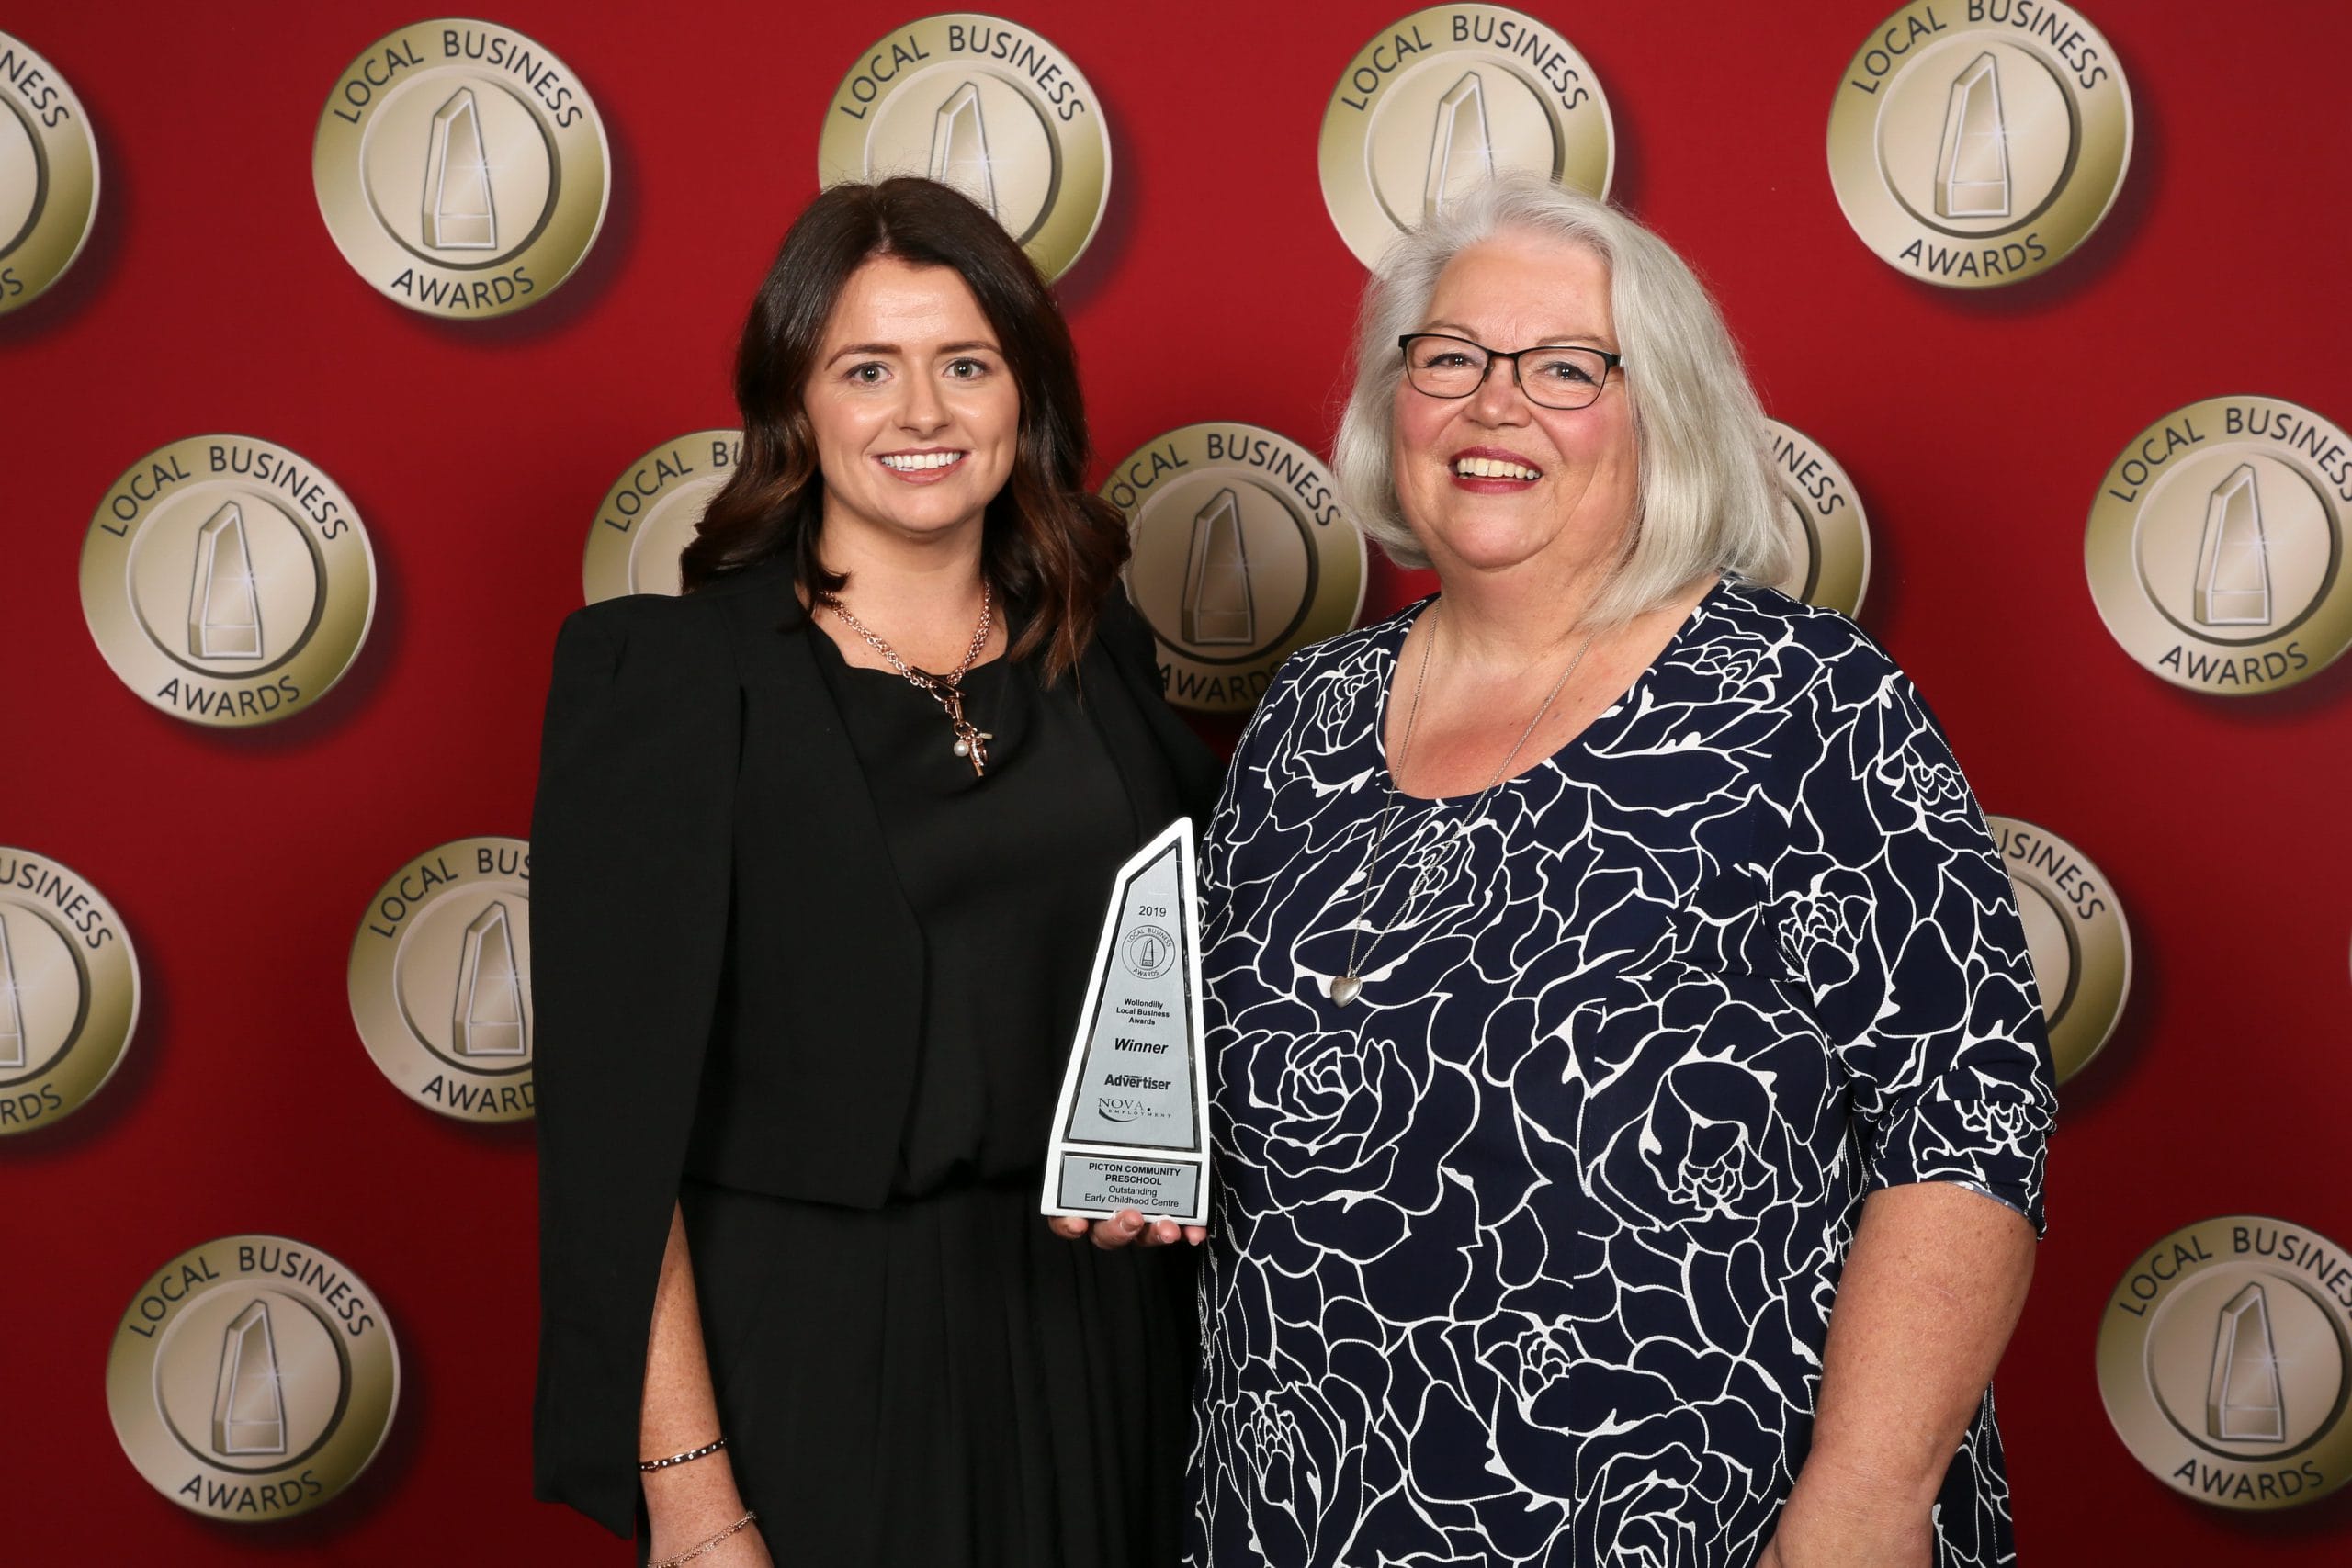 Picton Community Preschool Wins at the 2019 Wollondilly Local Business Awards